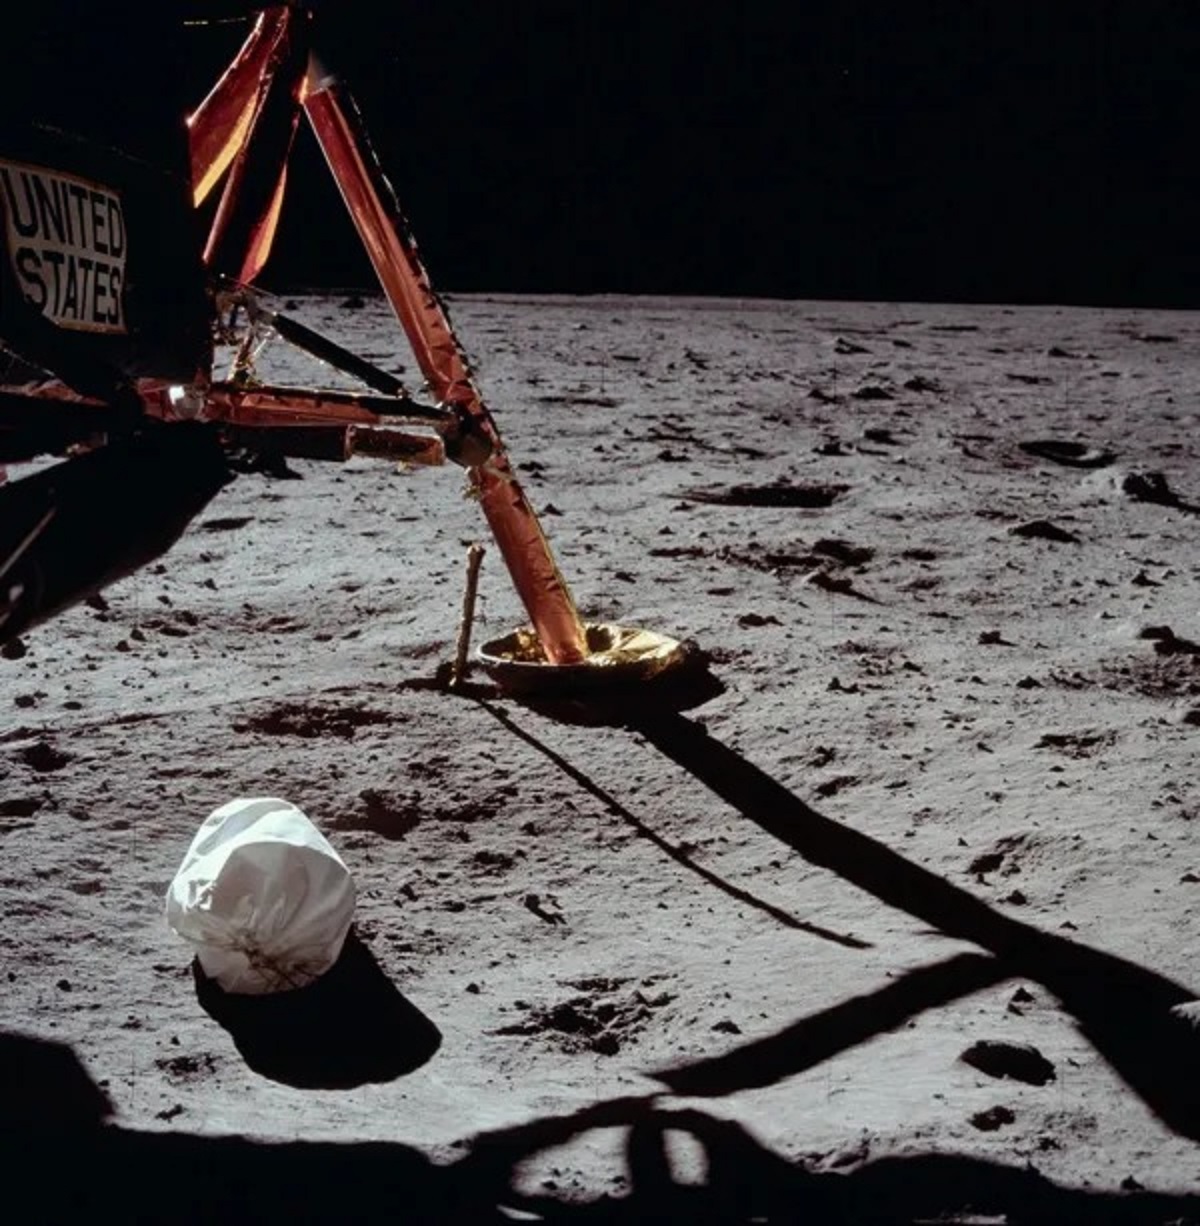 When we ended missions to the moon in 1972, we left behind over 90 bags full of human waste on its surface. Scientists now wish to study these to observe any long-term biological changes occurring in the lunar environment.